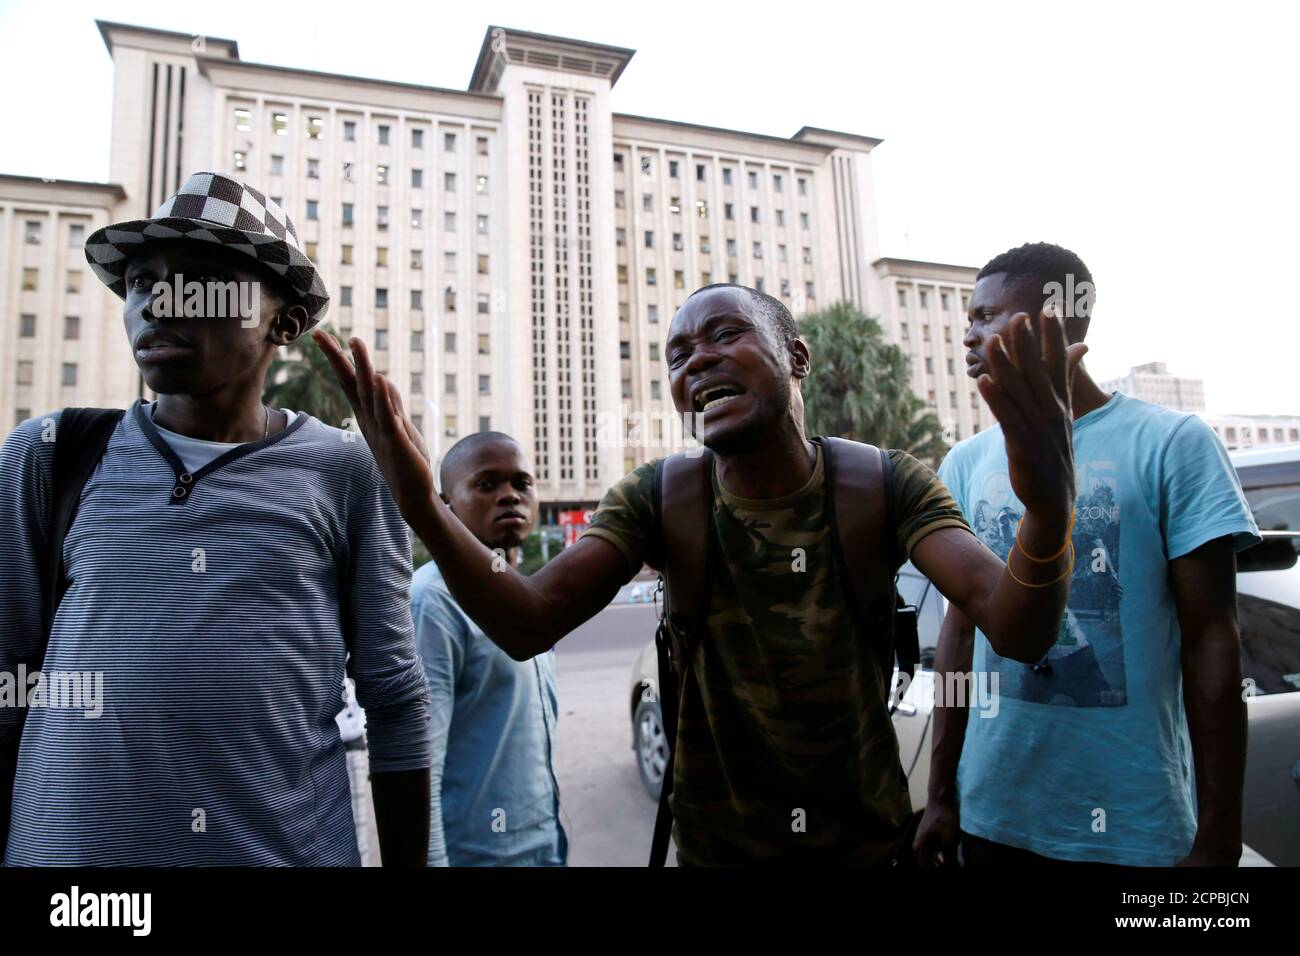 A man reacts after hearing the announcement by Congo's election board to postpone a presidential vote scheduled for Sunday by one week, outside the the Congo's National Independent Electoral Commission (CENI) building in Kinshasa, Democratic Republic of Congo, December 20, 2018.REUTERS/Baz Ratner Stock Photo